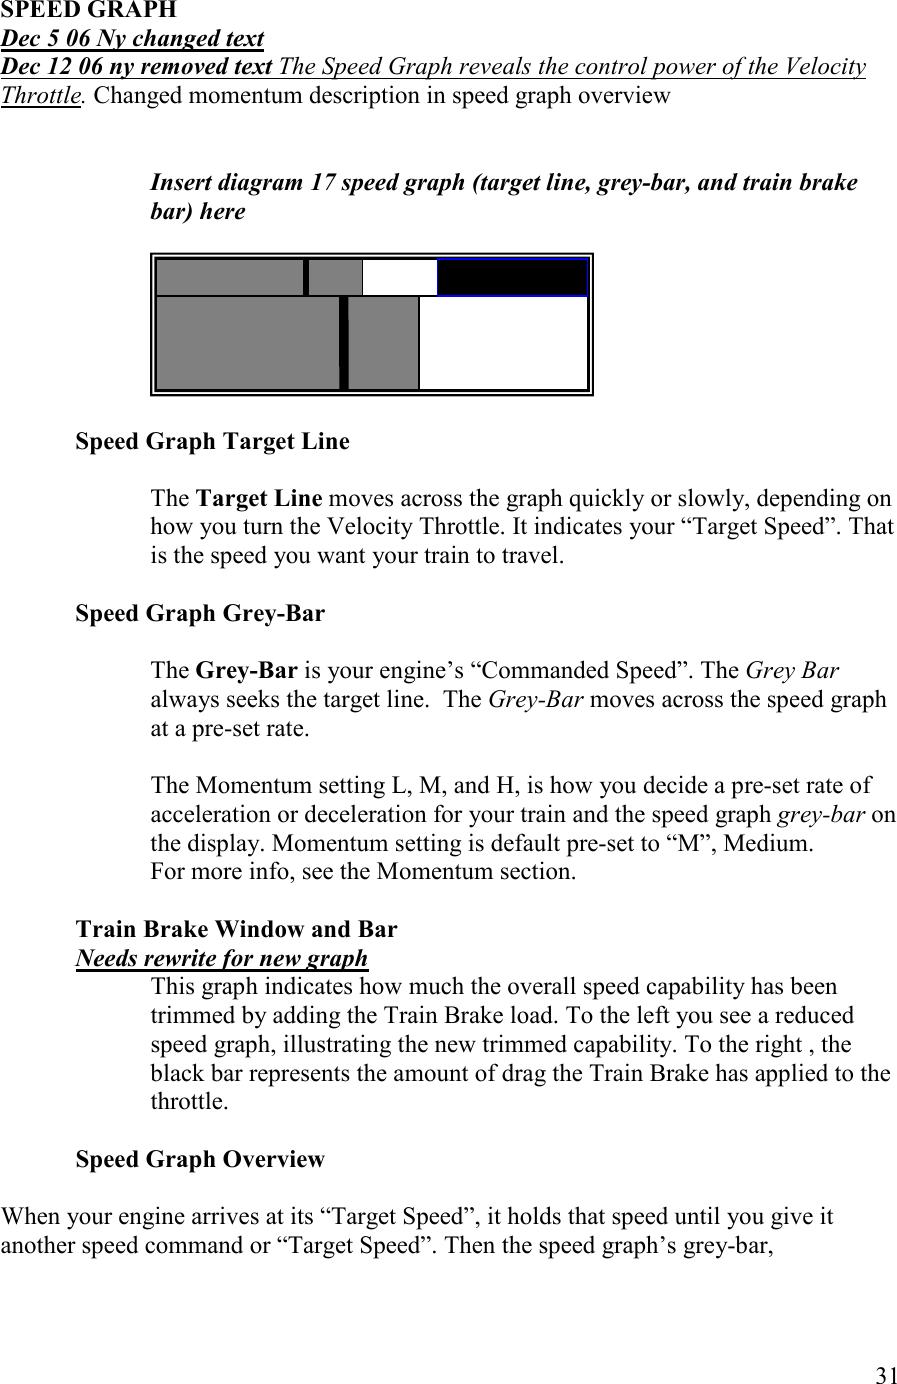   31  SPEED GRAPH Dec 5 06 y changed text Dec 12 06 ny removed text The Speed Graph reveals the control power of the Velocity Throttle. Changed momentum description in speed graph overview   Insert diagram 17 speed graph (target line, grey-bar, and train brake bar) here        Speed Graph Target Line   The Target Line moves across the graph quickly or slowly, depending on how you turn the Velocity Throttle. It indicates your “Target Speed”. That is the speed you want your train to travel.   Speed Graph Grey-Bar   The Grey-Bar is your engine’s “Commanded Speed”. The Grey Bar always seeks the target line.  The Grey-Bar moves across the speed graph at a pre-set rate.   The Momentum setting L, M, and H, is how you decide a pre-set rate of acceleration or deceleration for your train and the speed graph grey-bar on the display. Momentum setting is default pre-set to “M”, Medium.  For more info, see the Momentum section.  Train Brake Window and Bar eeds rewrite for new graph This graph indicates how much the overall speed capability has been trimmed by adding the Train Brake load. To the left you see a reduced speed graph, illustrating the new trimmed capability. To the right , the black bar represents the amount of drag the Train Brake has applied to the throttle.  Speed Graph Overview   When your engine arrives at its “Target Speed”, it holds that speed until you give it another speed command or “Target Speed”. Then the speed graph’s grey-bar, 